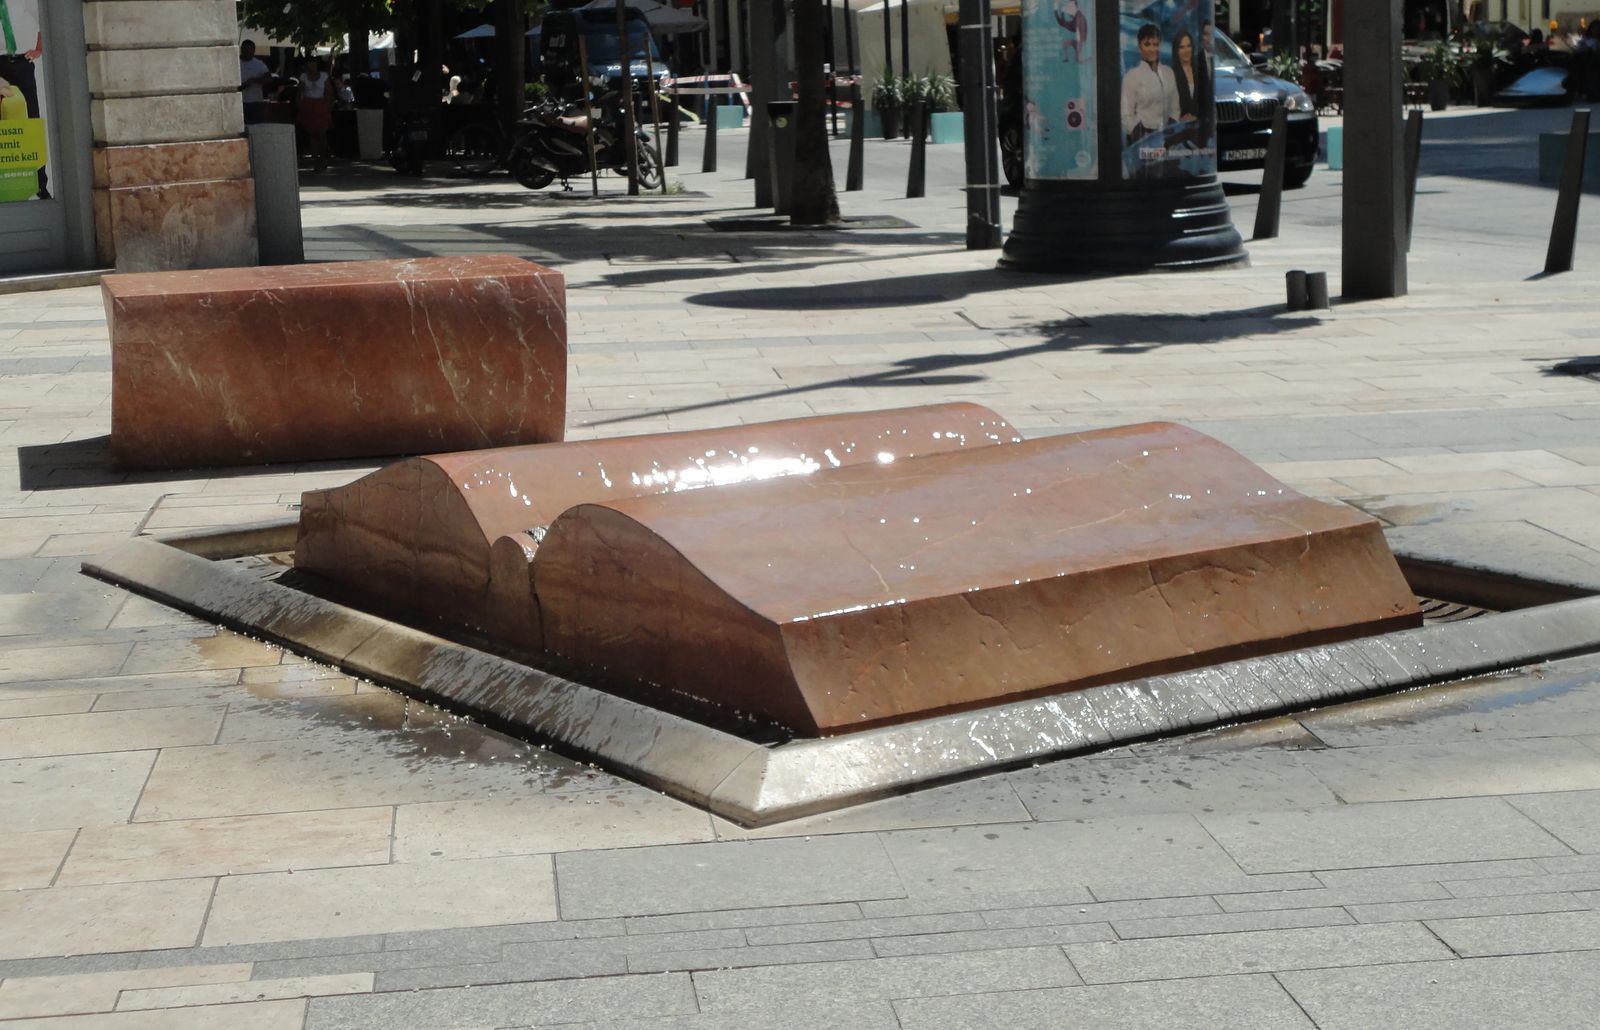 Photo of a fountain shaped like a book with an interesting water effect, located in Budapest, Hungary.